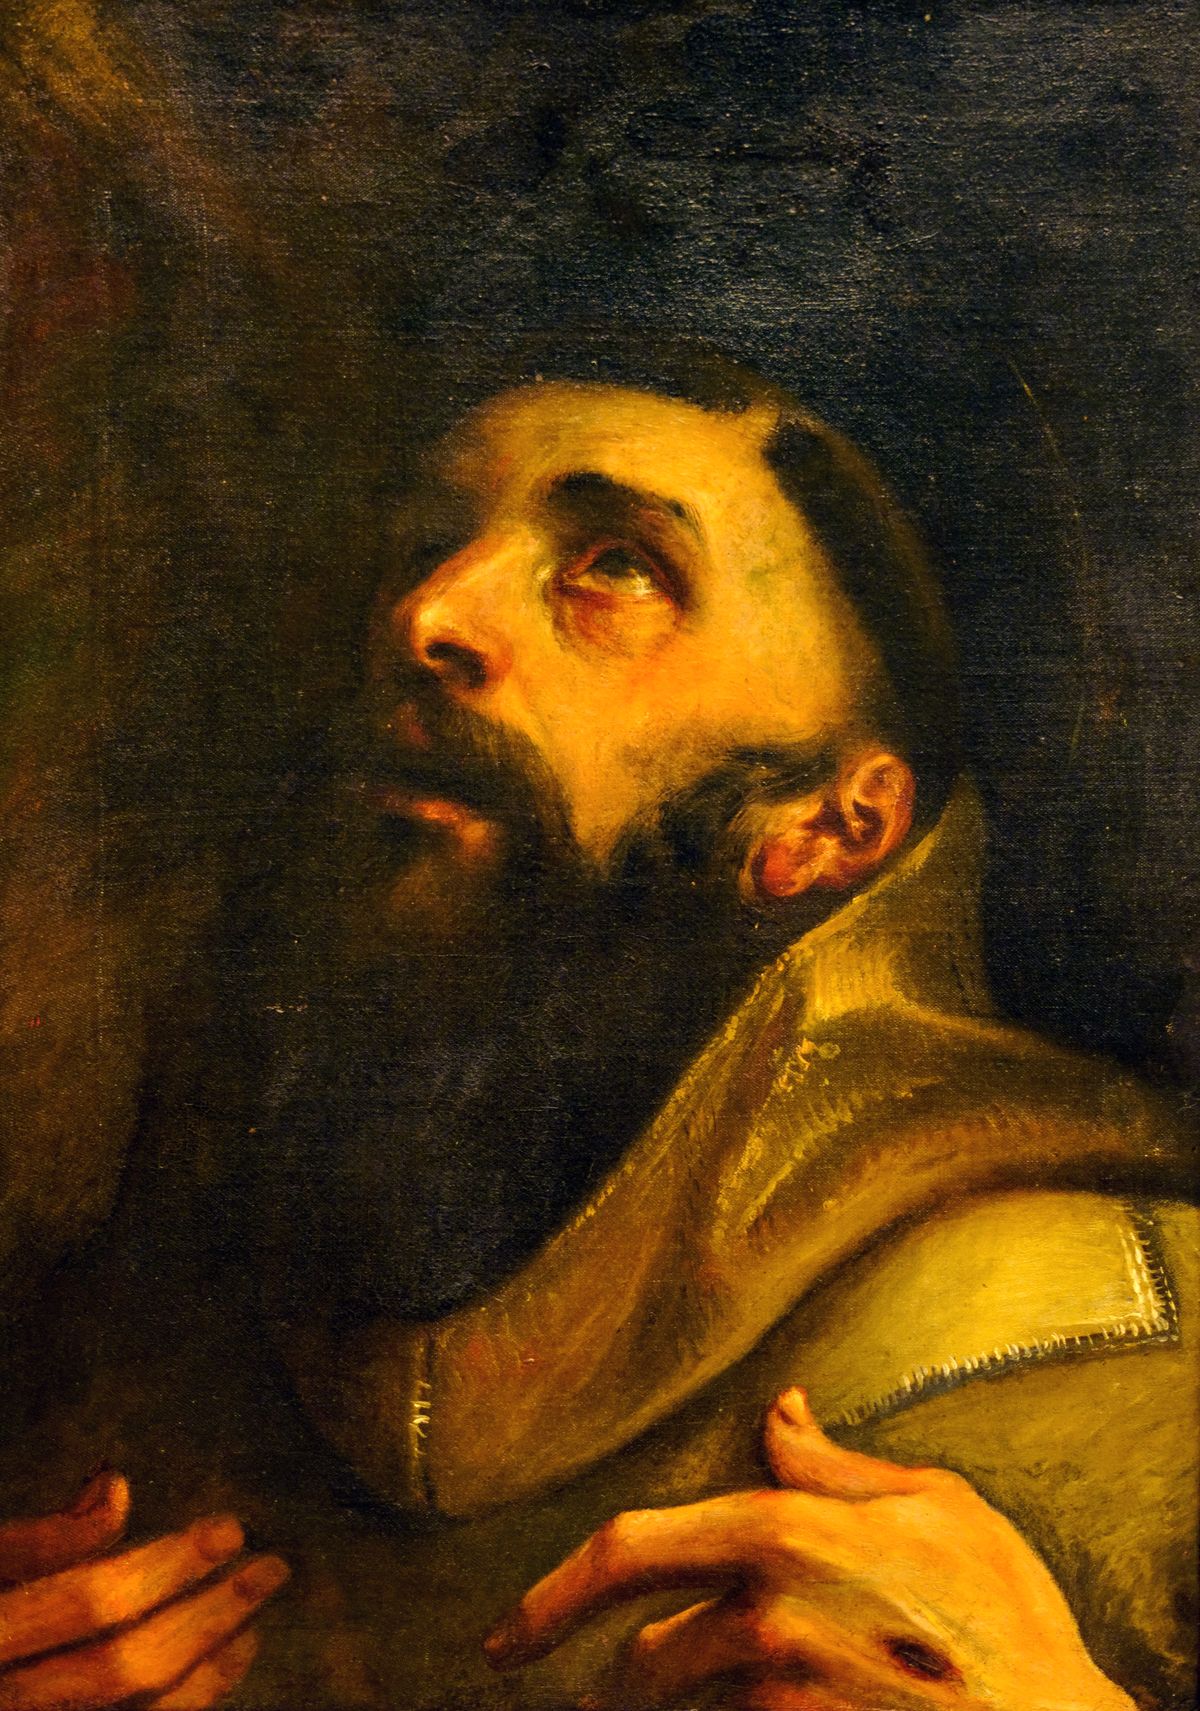 Francis of Assisi (1590s) by Annibale Carracci - Public Domain Catholic Painting